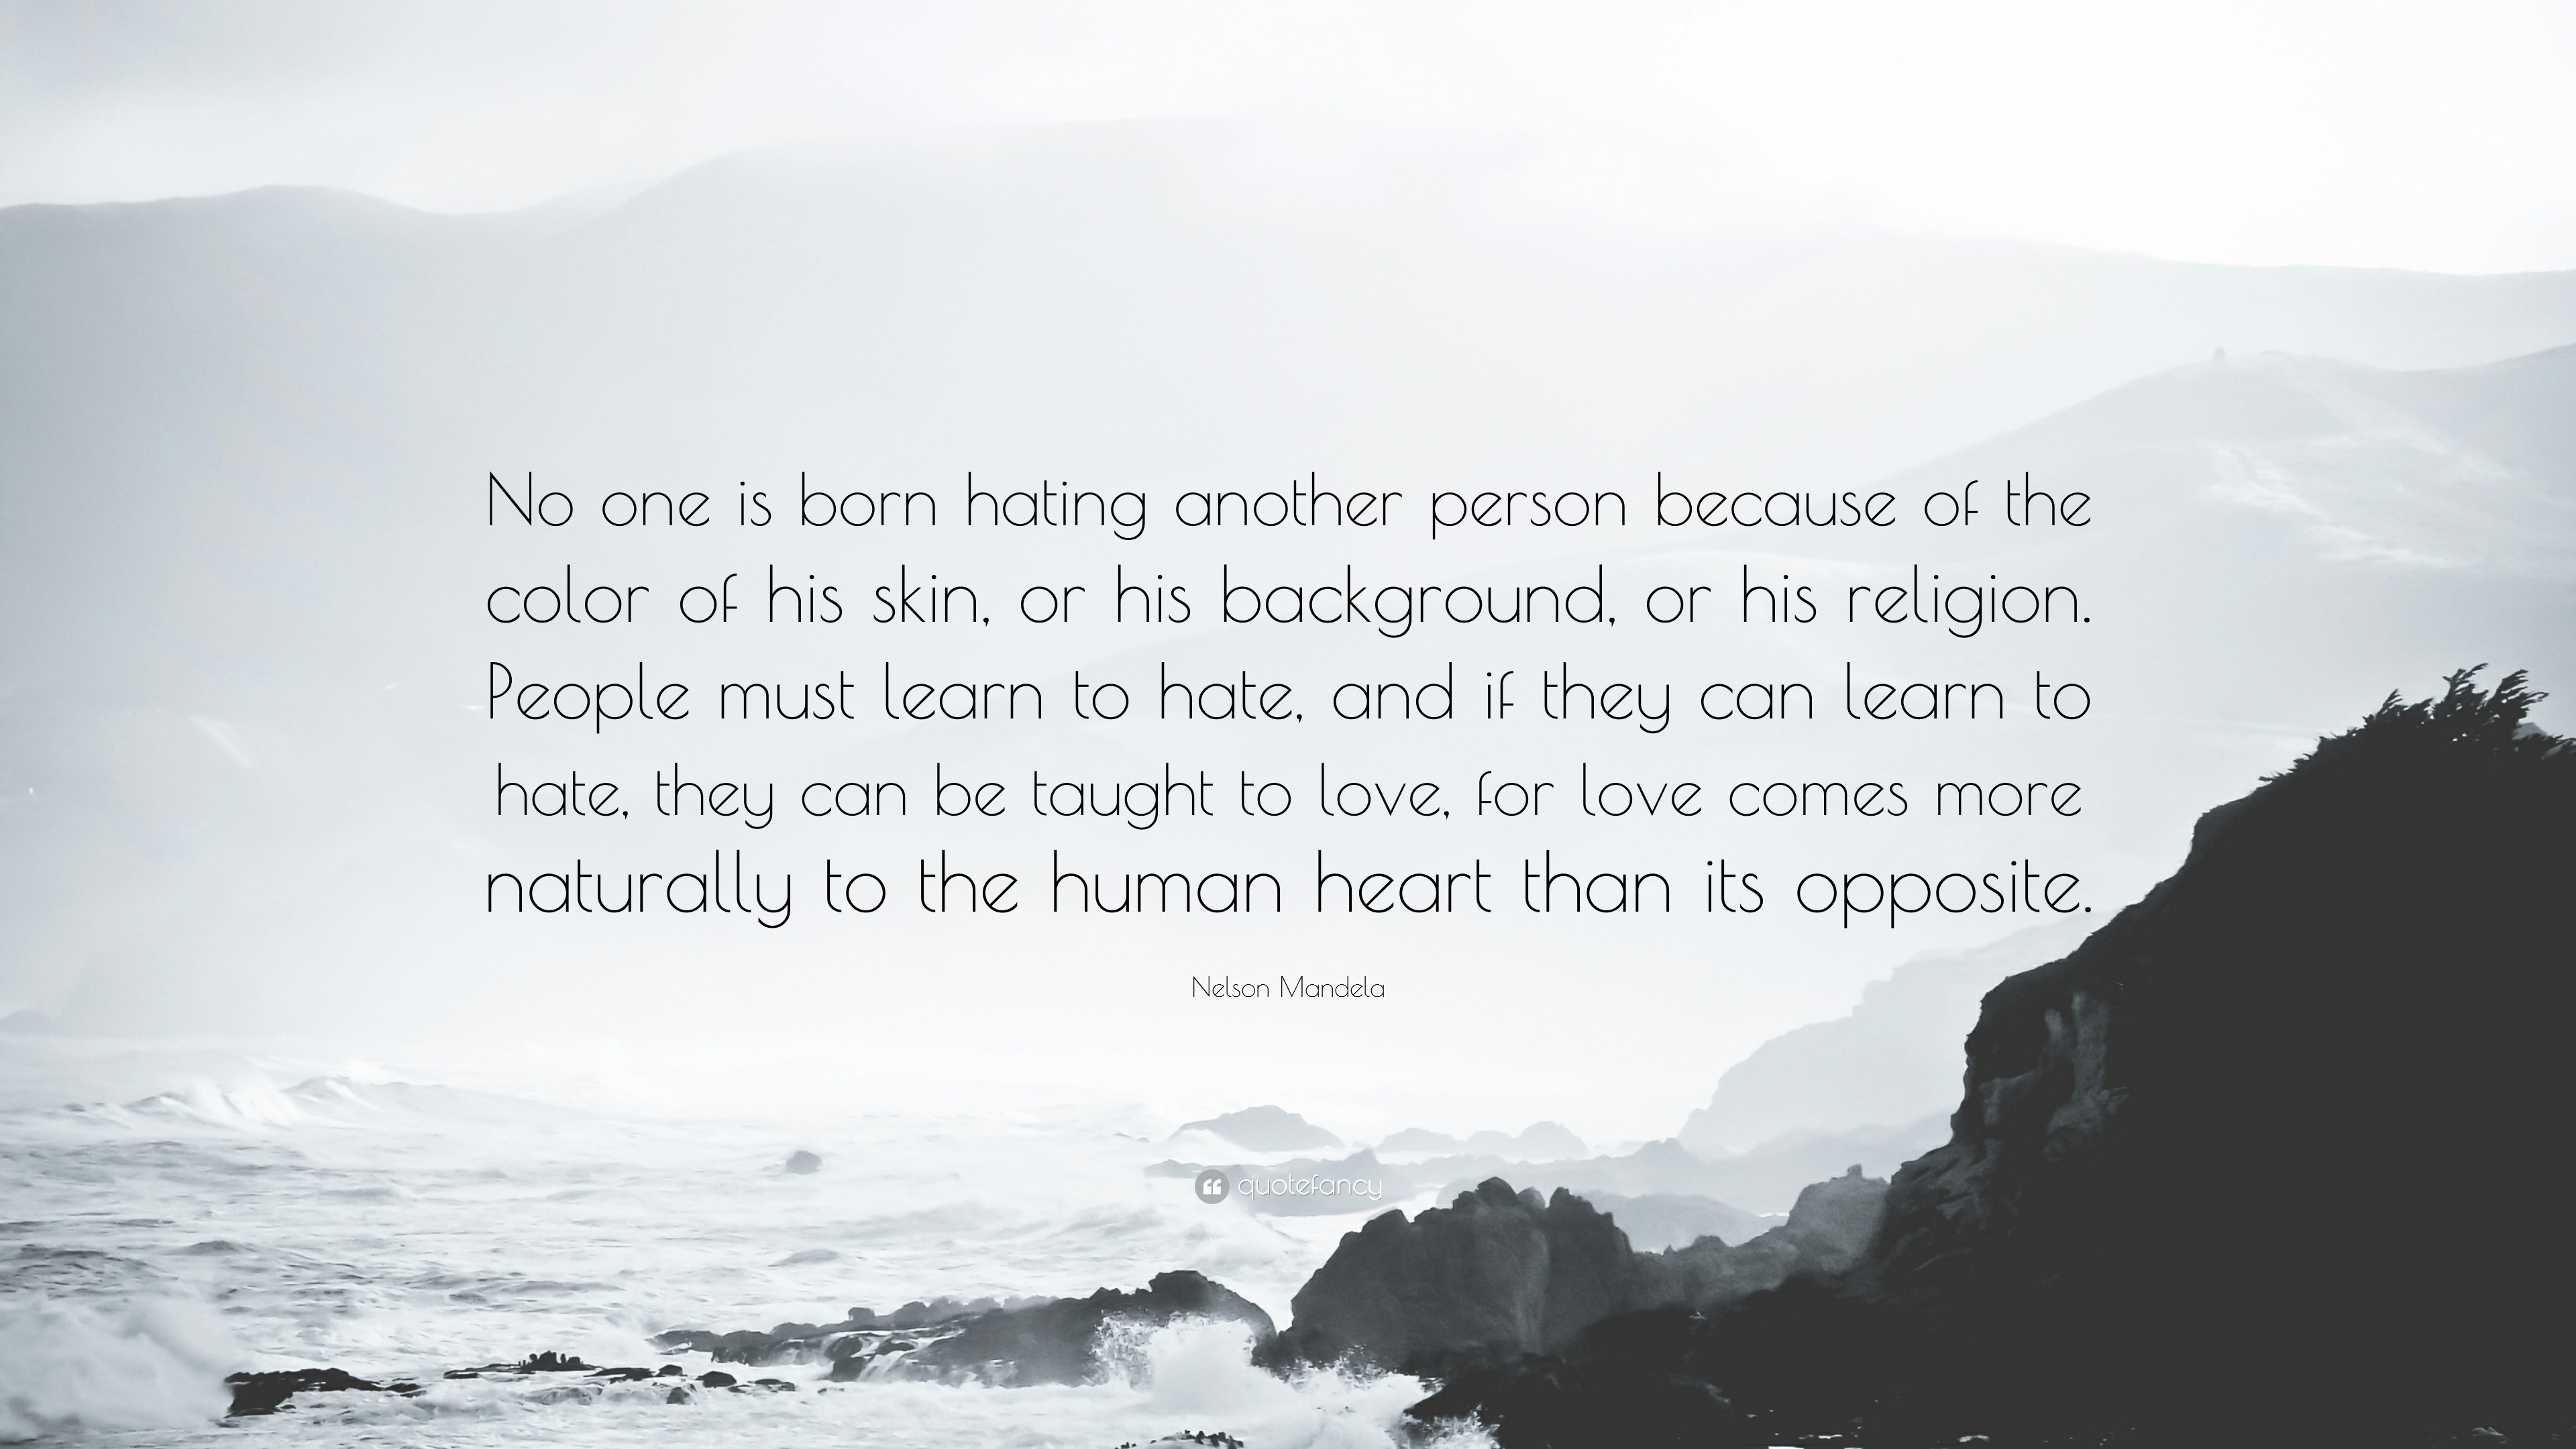 Nelson Mandela Quote: “No one is born hating another person because of